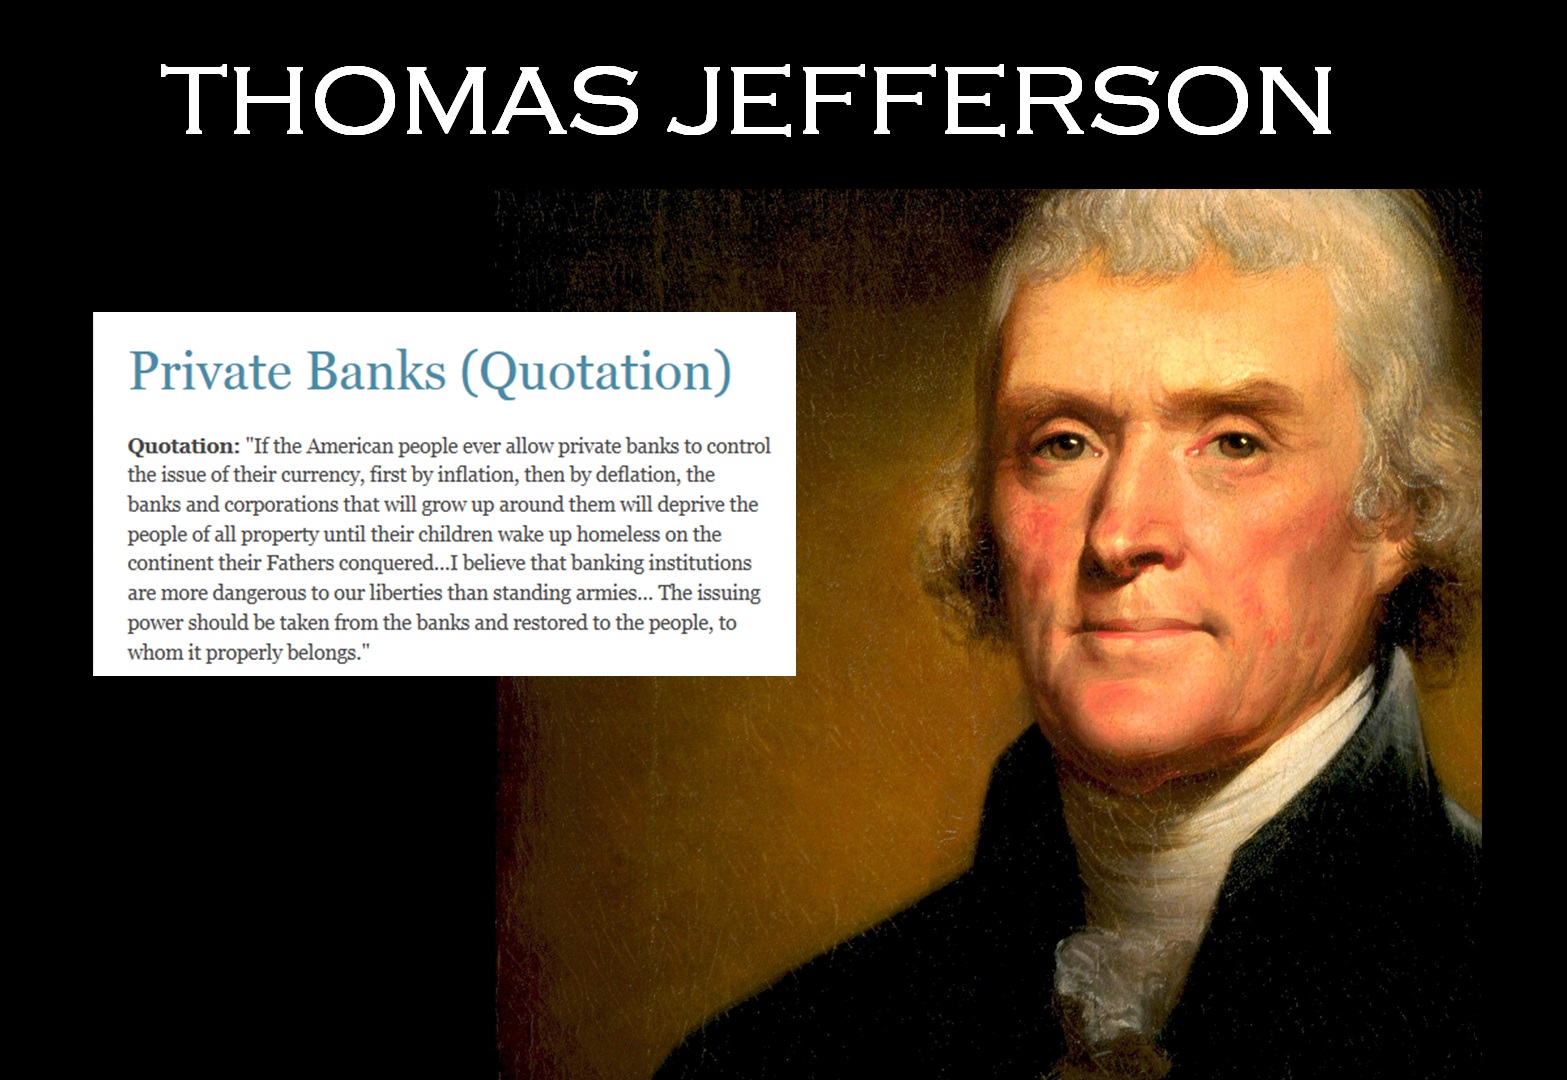 Thomas Jefferson - Quote about Currency and Private Banks